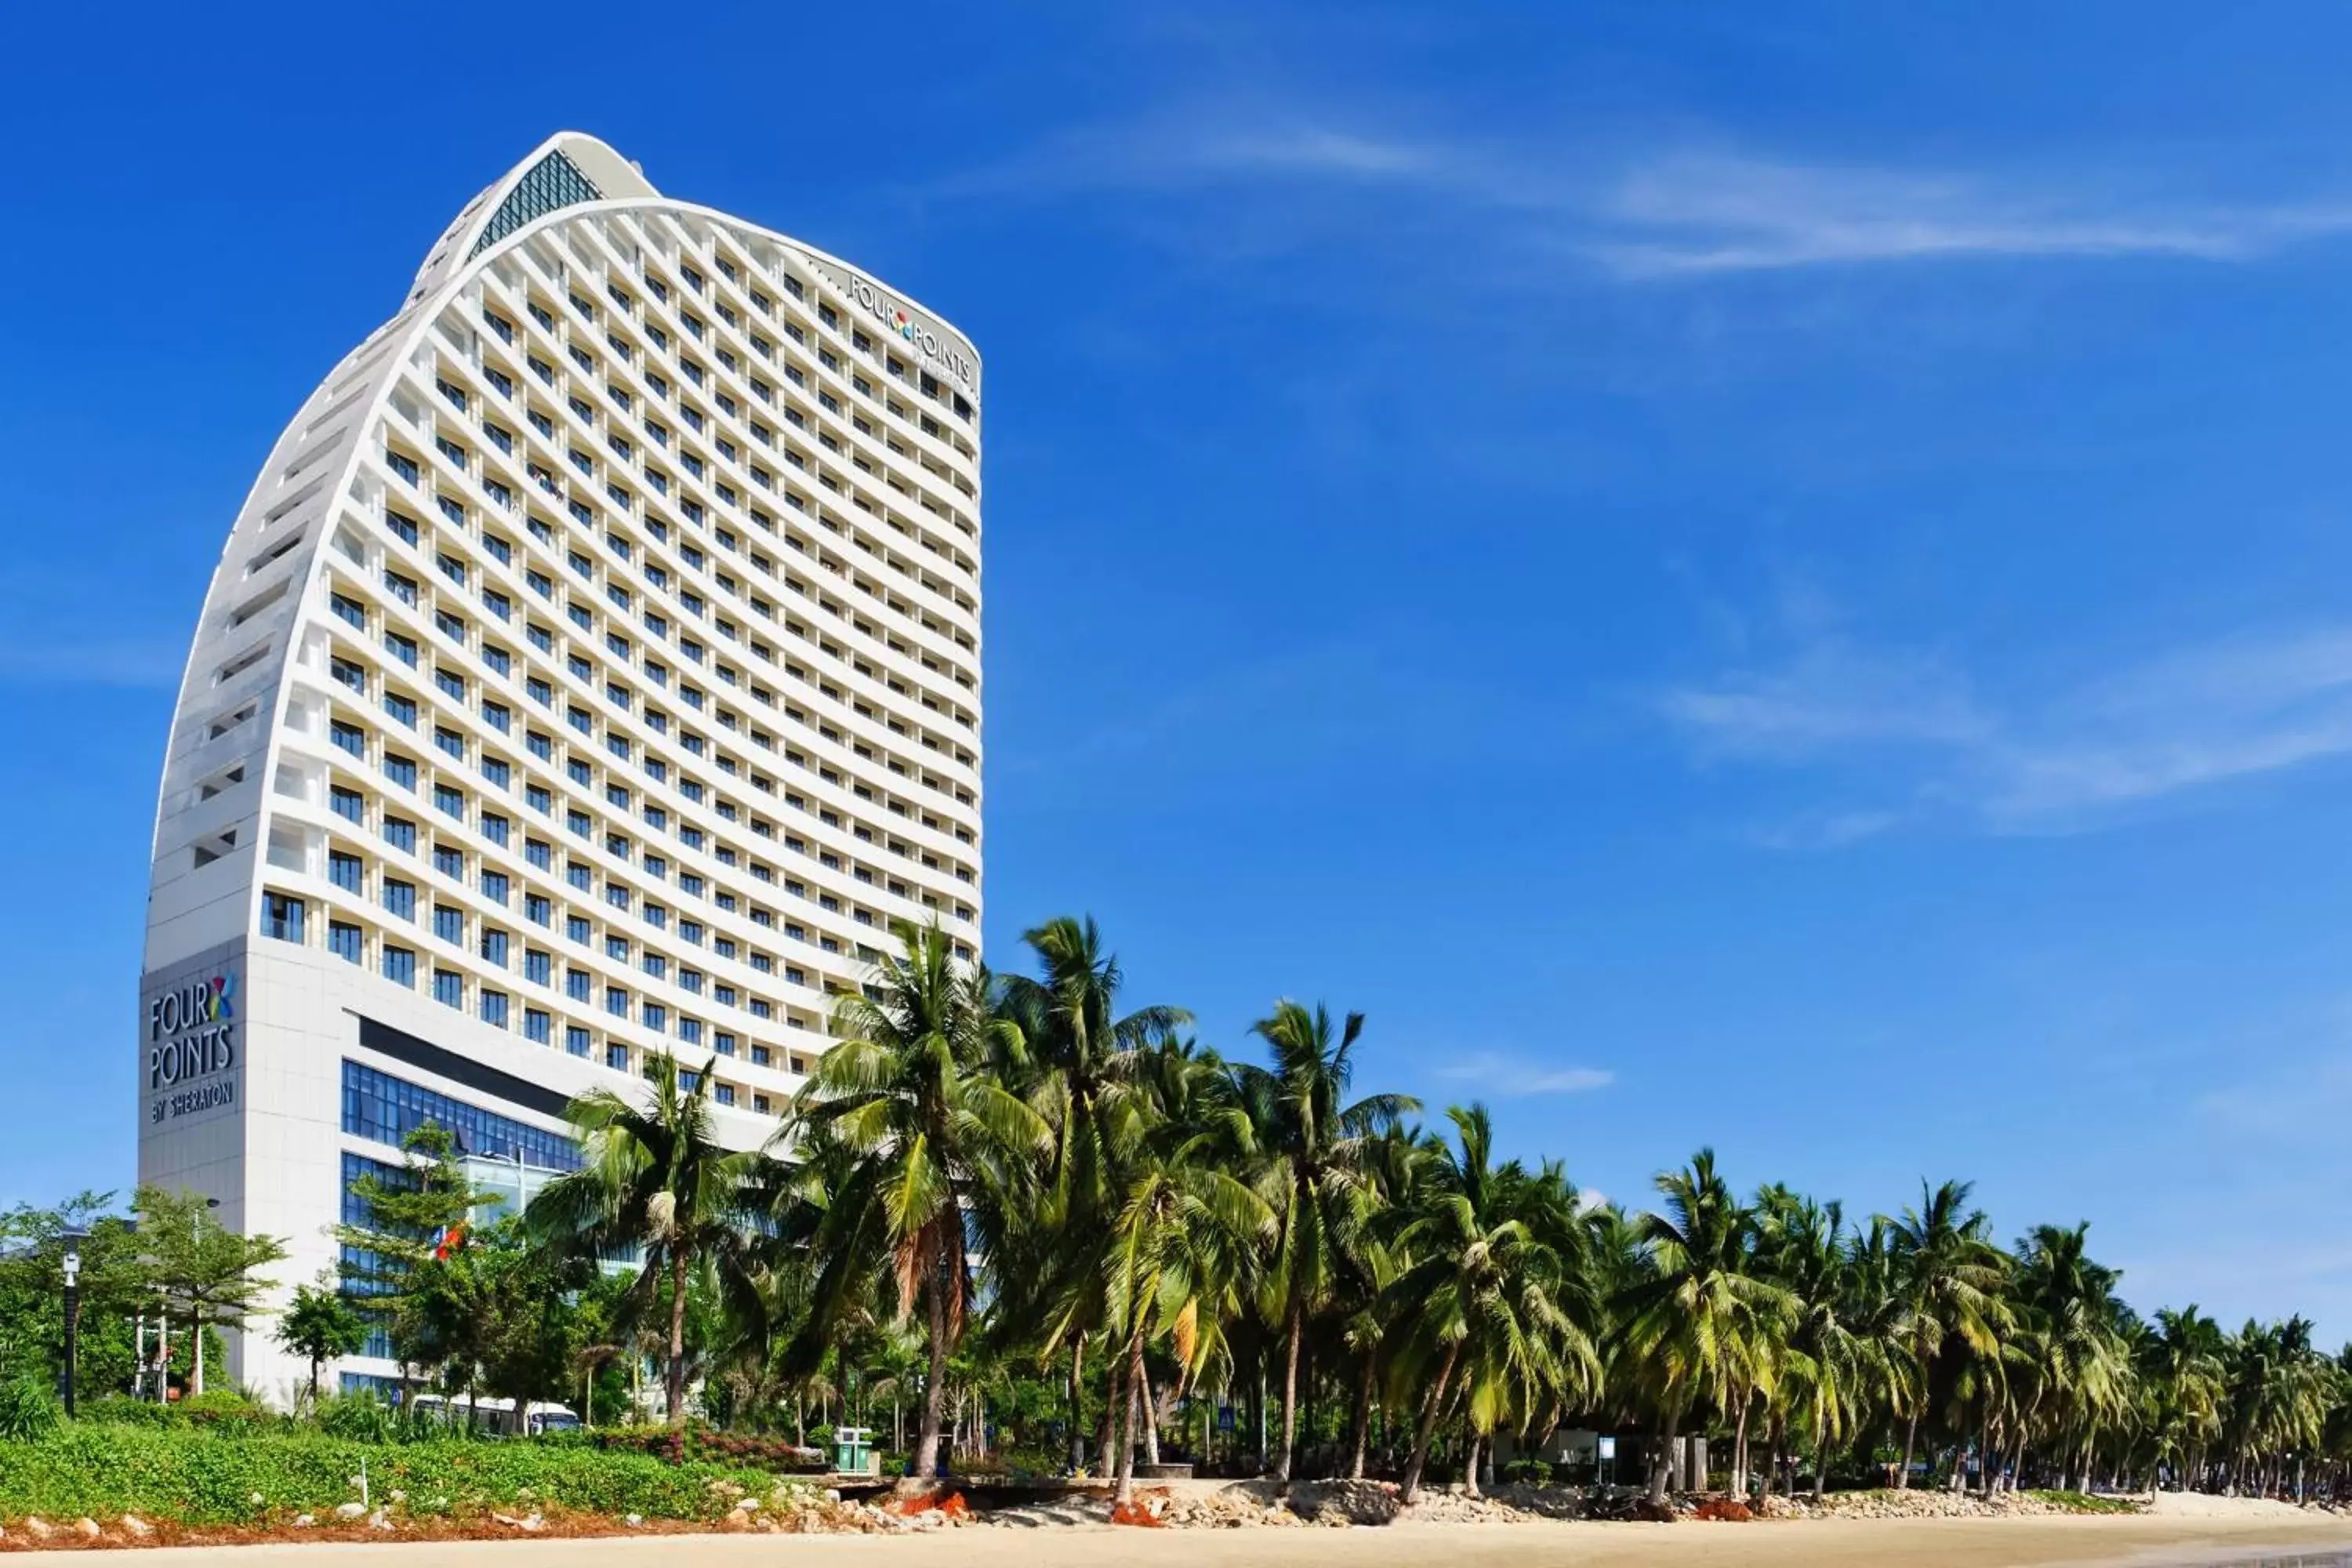 Property Building in Four Points by Sheraton Hainan, Sanya